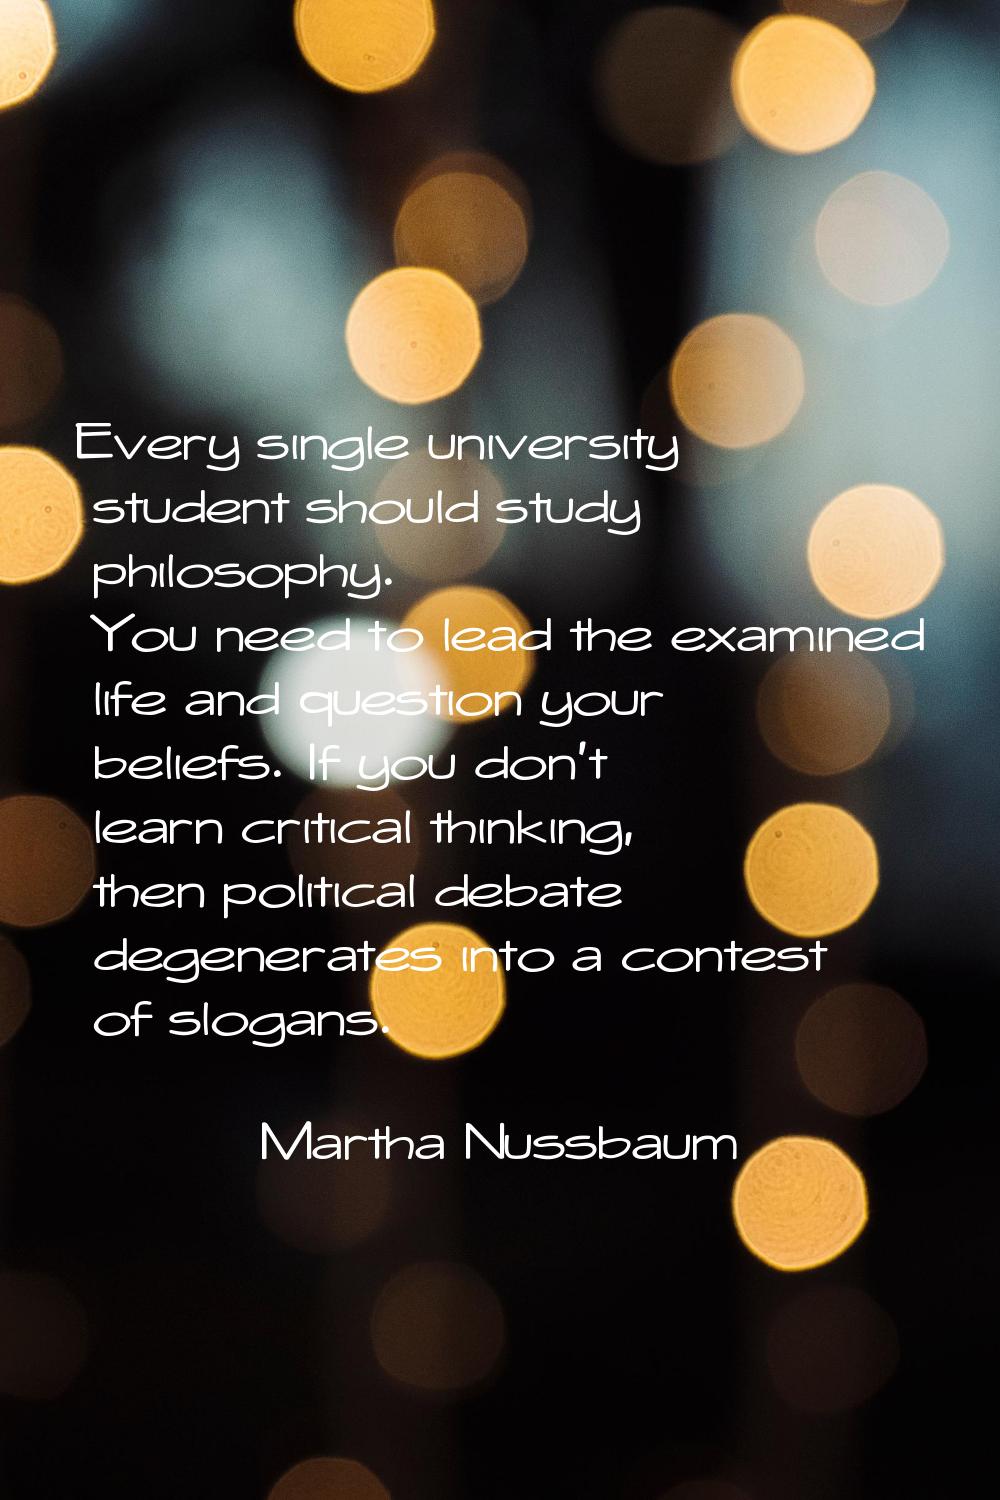 Every single university student should study philosophy. You need to lead the examined life and que